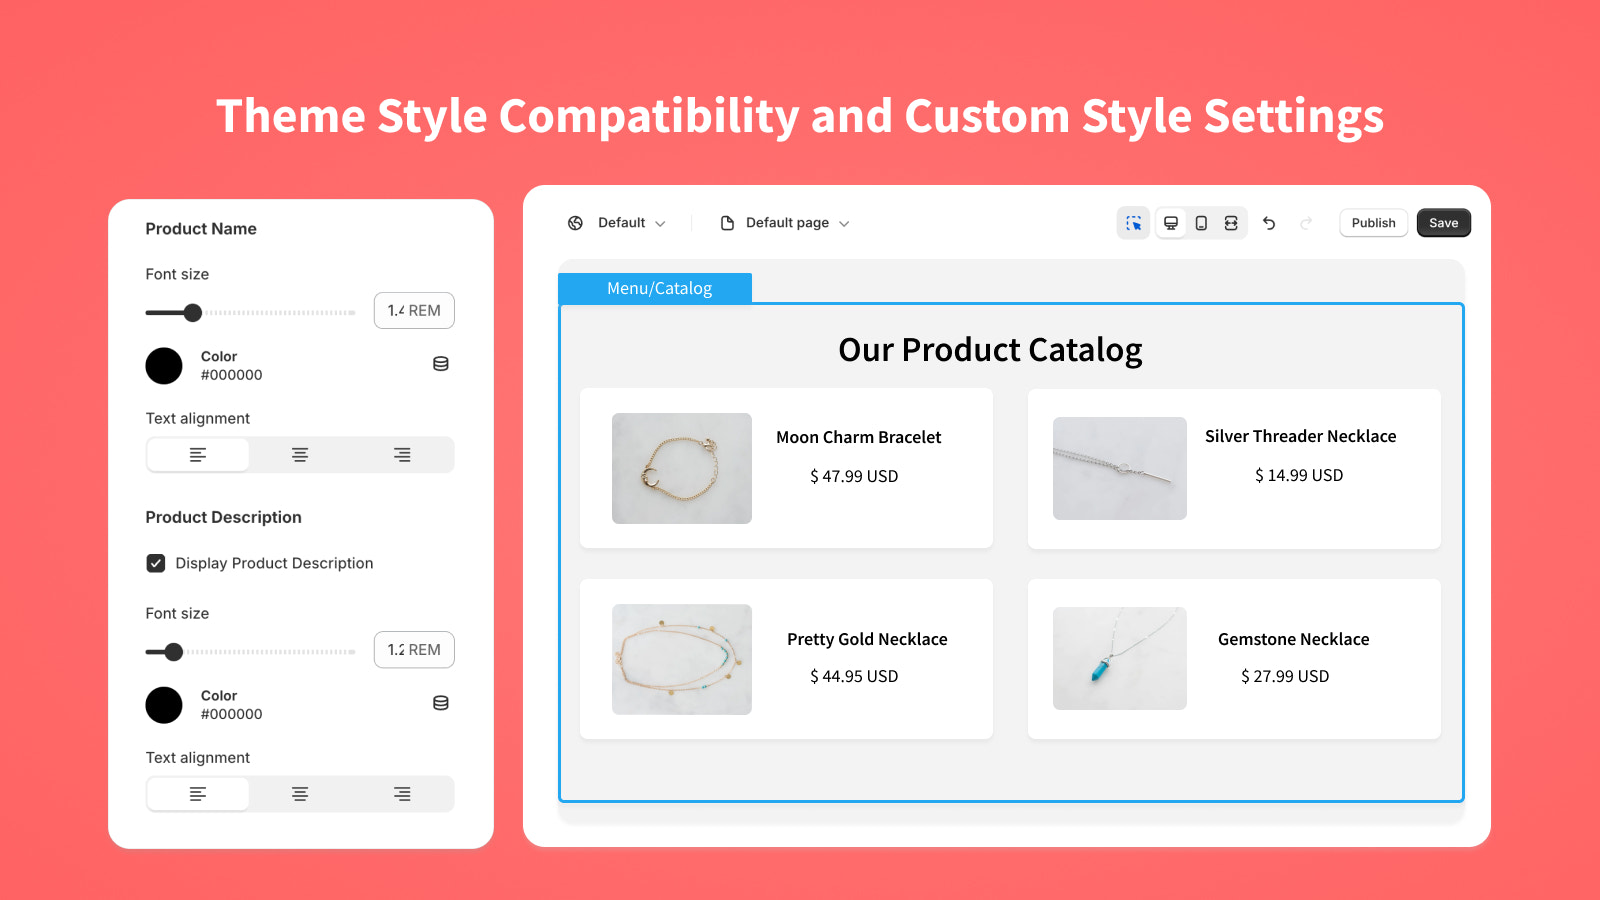 Theme Style Compatibility and Custom Style Settings